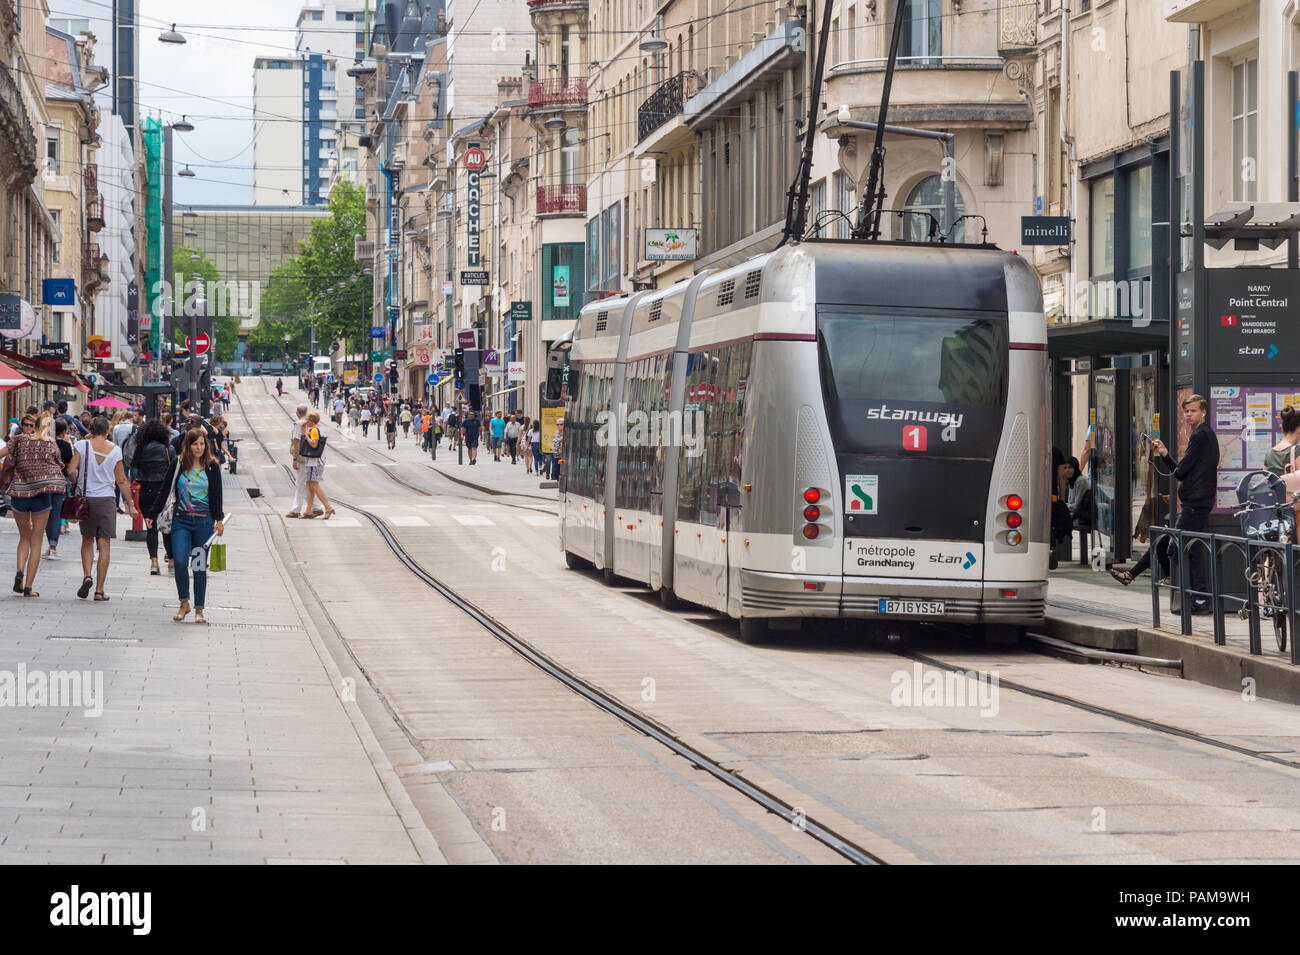 Nancy, France - 21 June 2018: Bombardier Guided Light Transit guided bus on Saint-Georges street. Stock Photo